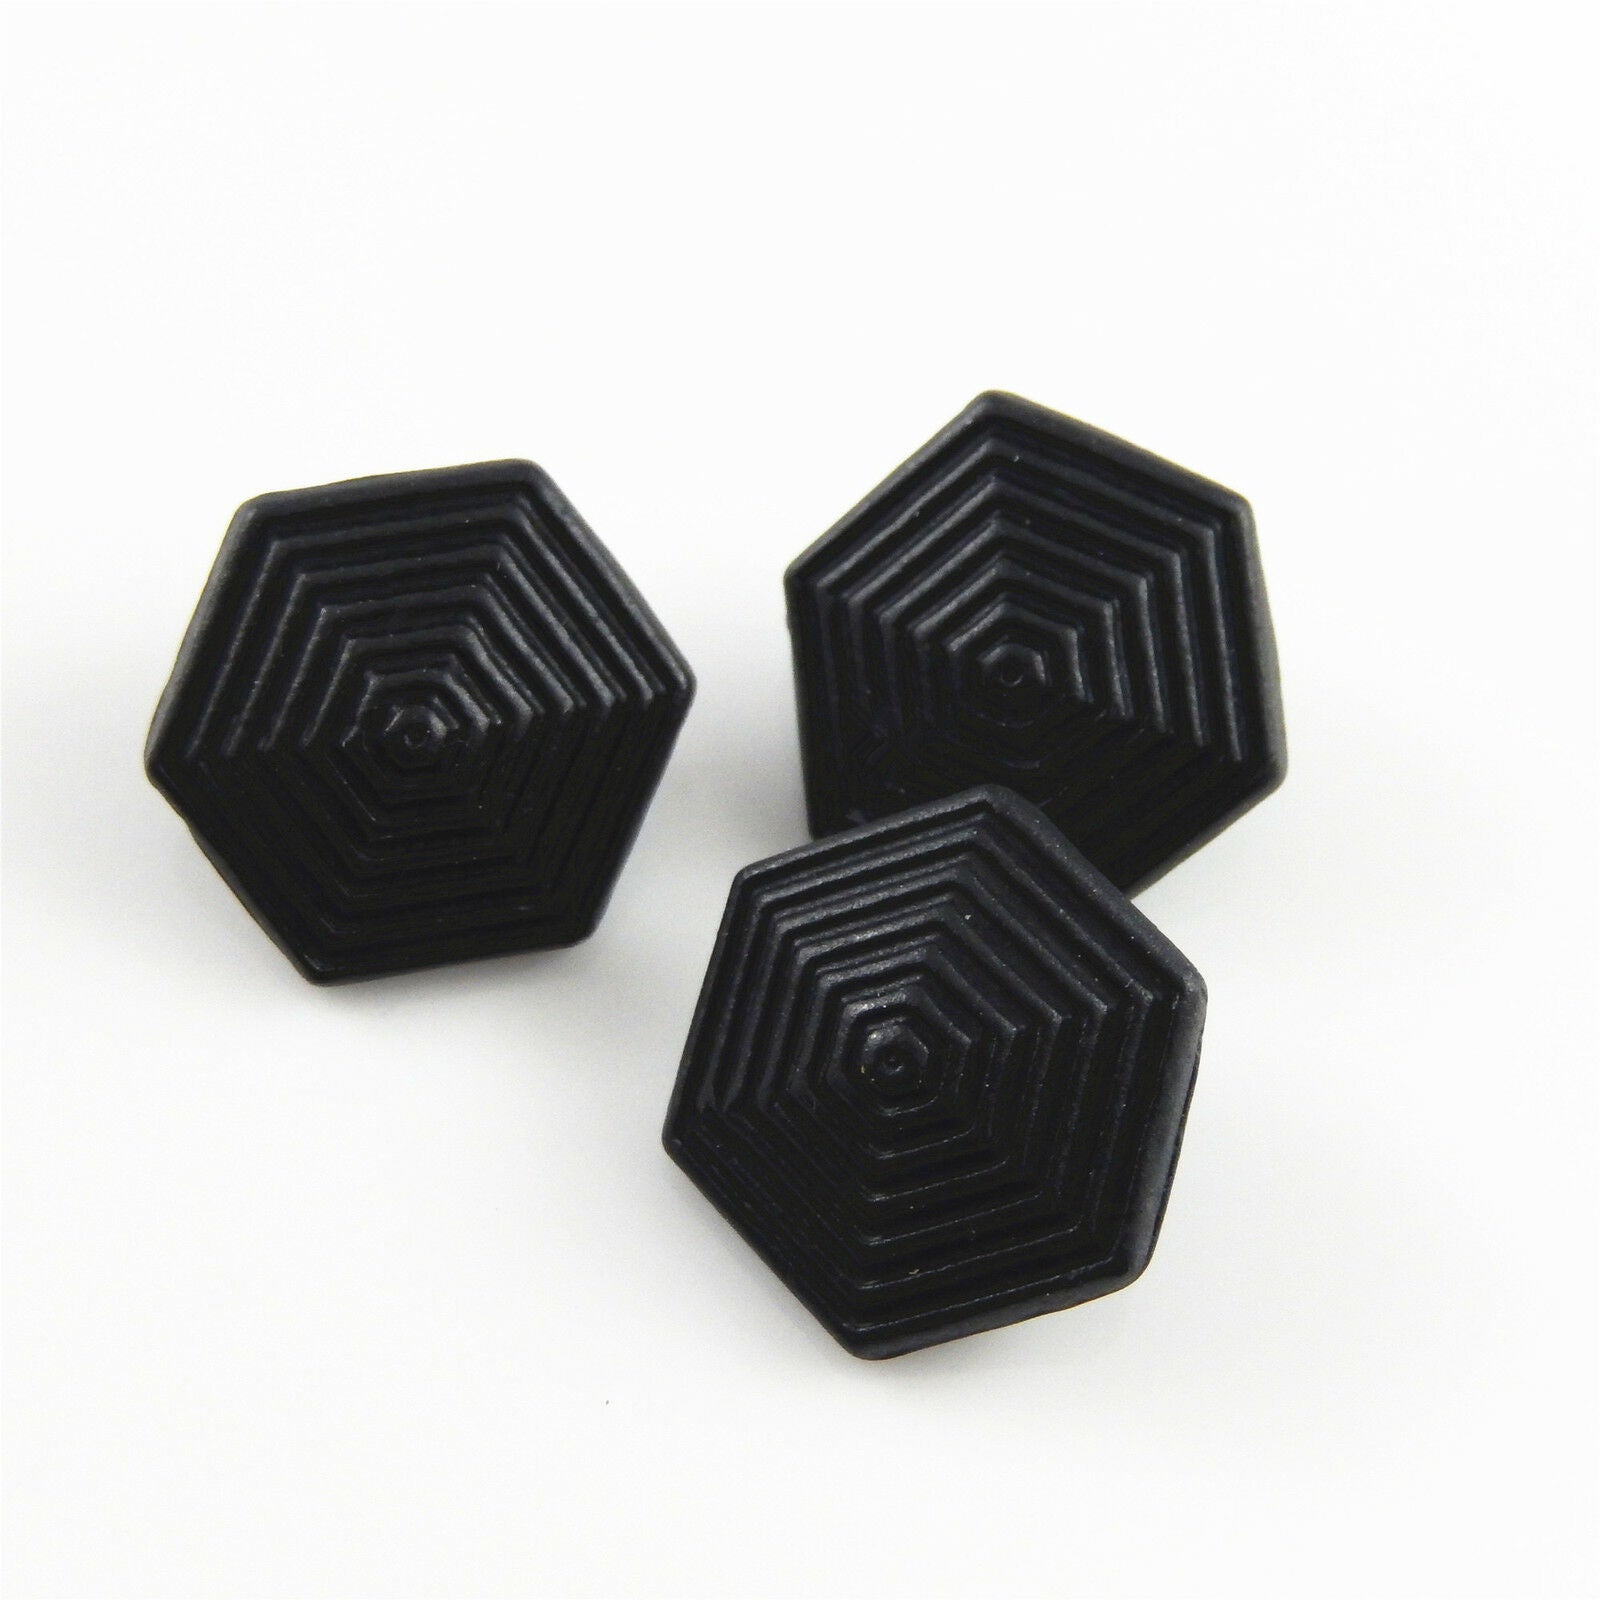 10 pcs Black Matte Alloy Button Hexagon Shape Crafting Sewing Findings 18*18*8mm